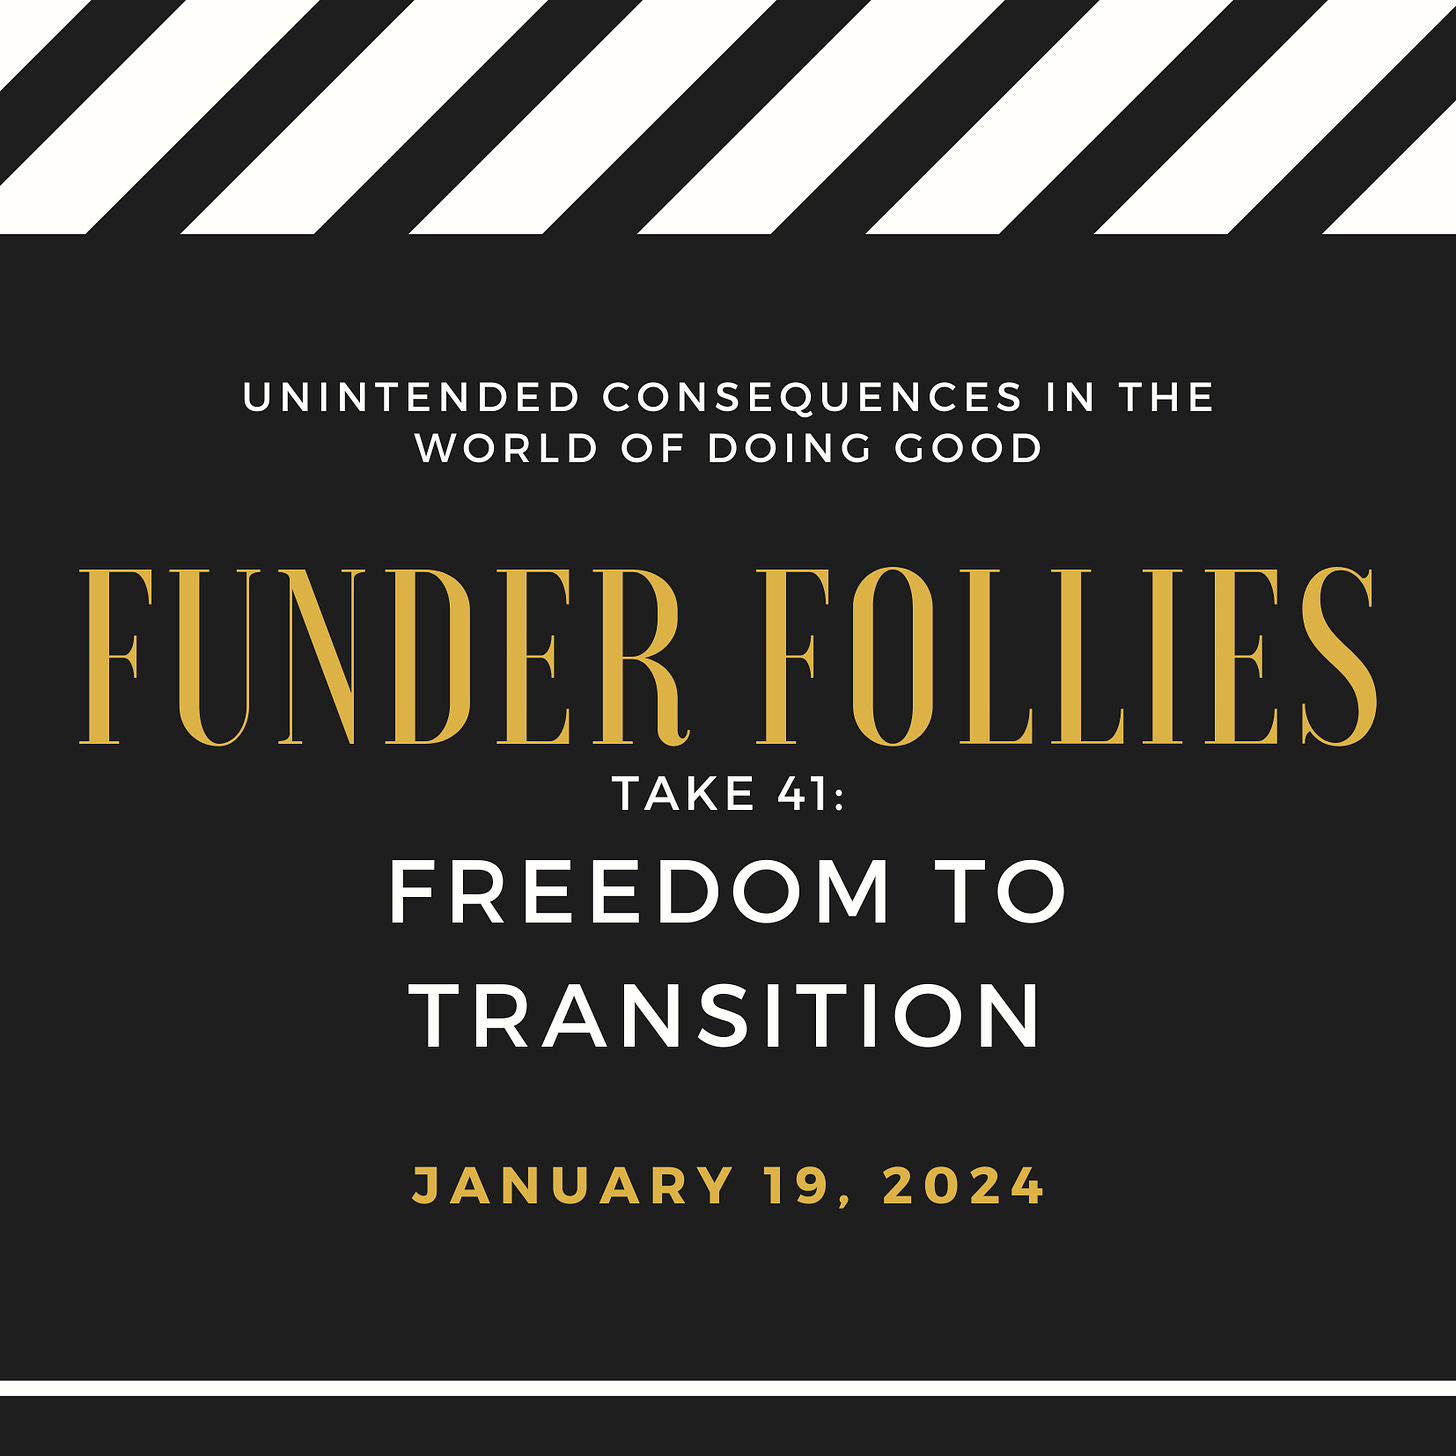 black and white film clapper board showing Funder Follies, Unintended Consequences of Doing Good, Take # 41, Freedom to Transition, January 19, 2024